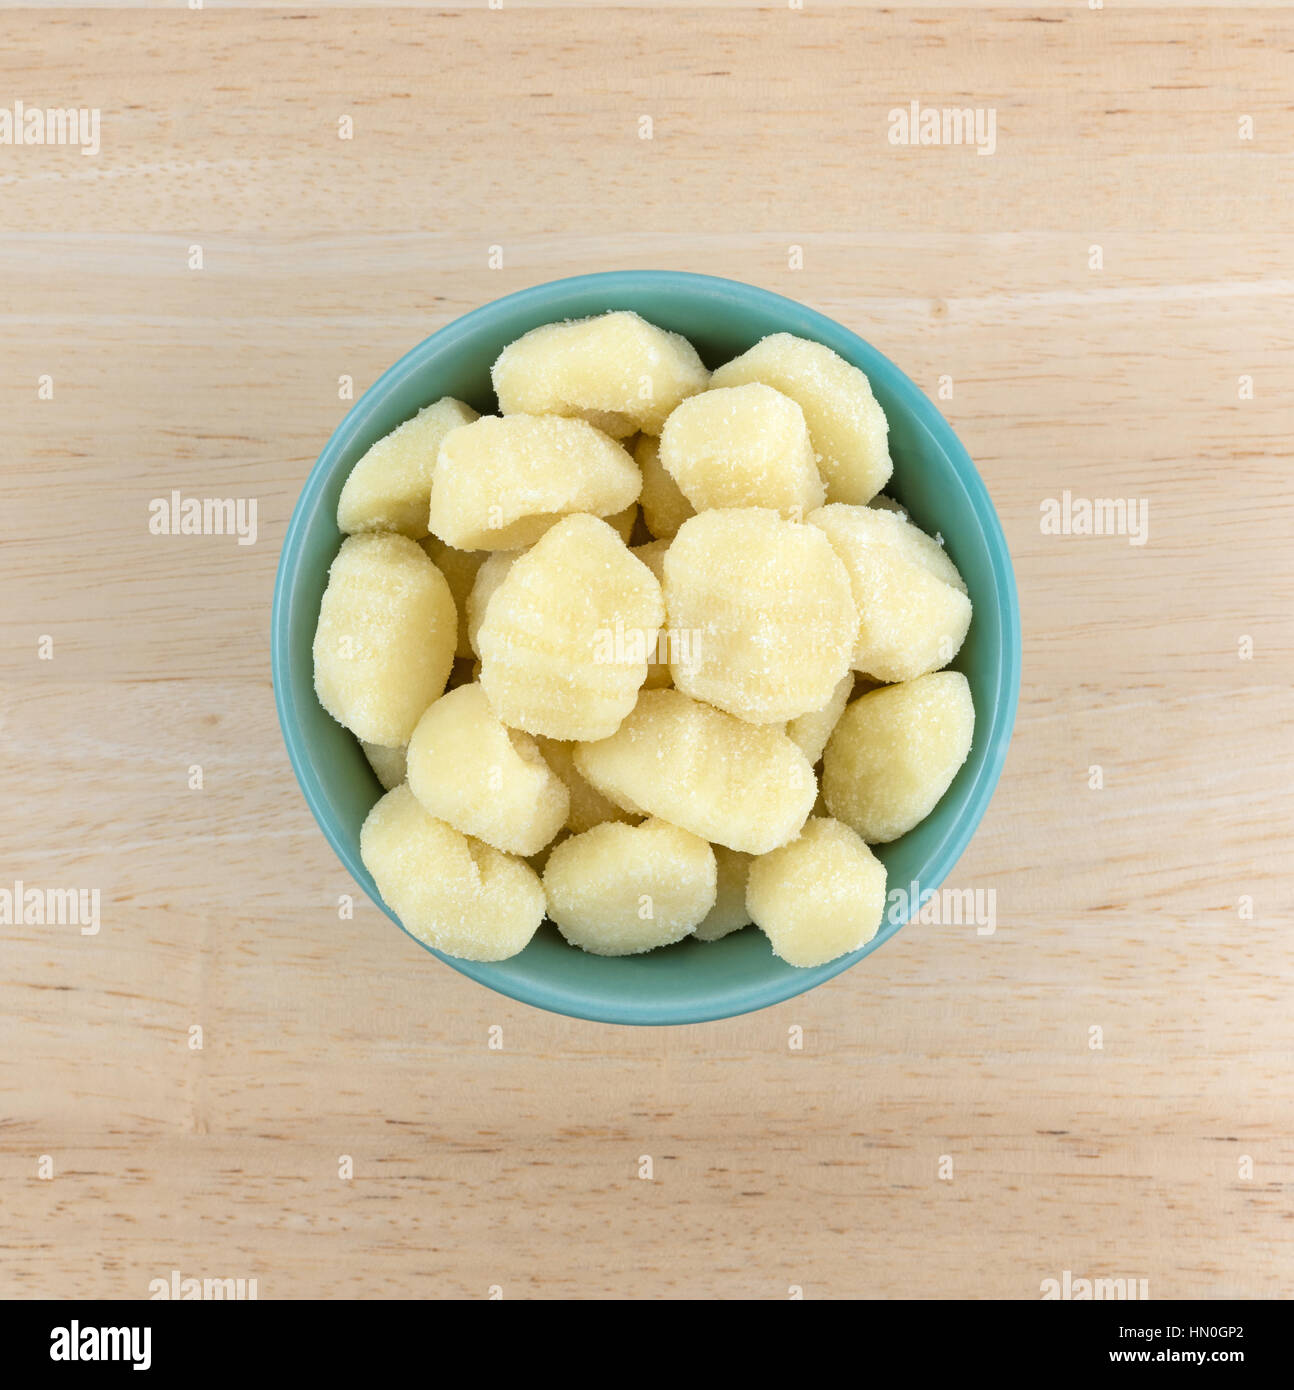 Top view of plain potato gnocchi in a green bowl atop a wood table. Stock Photo